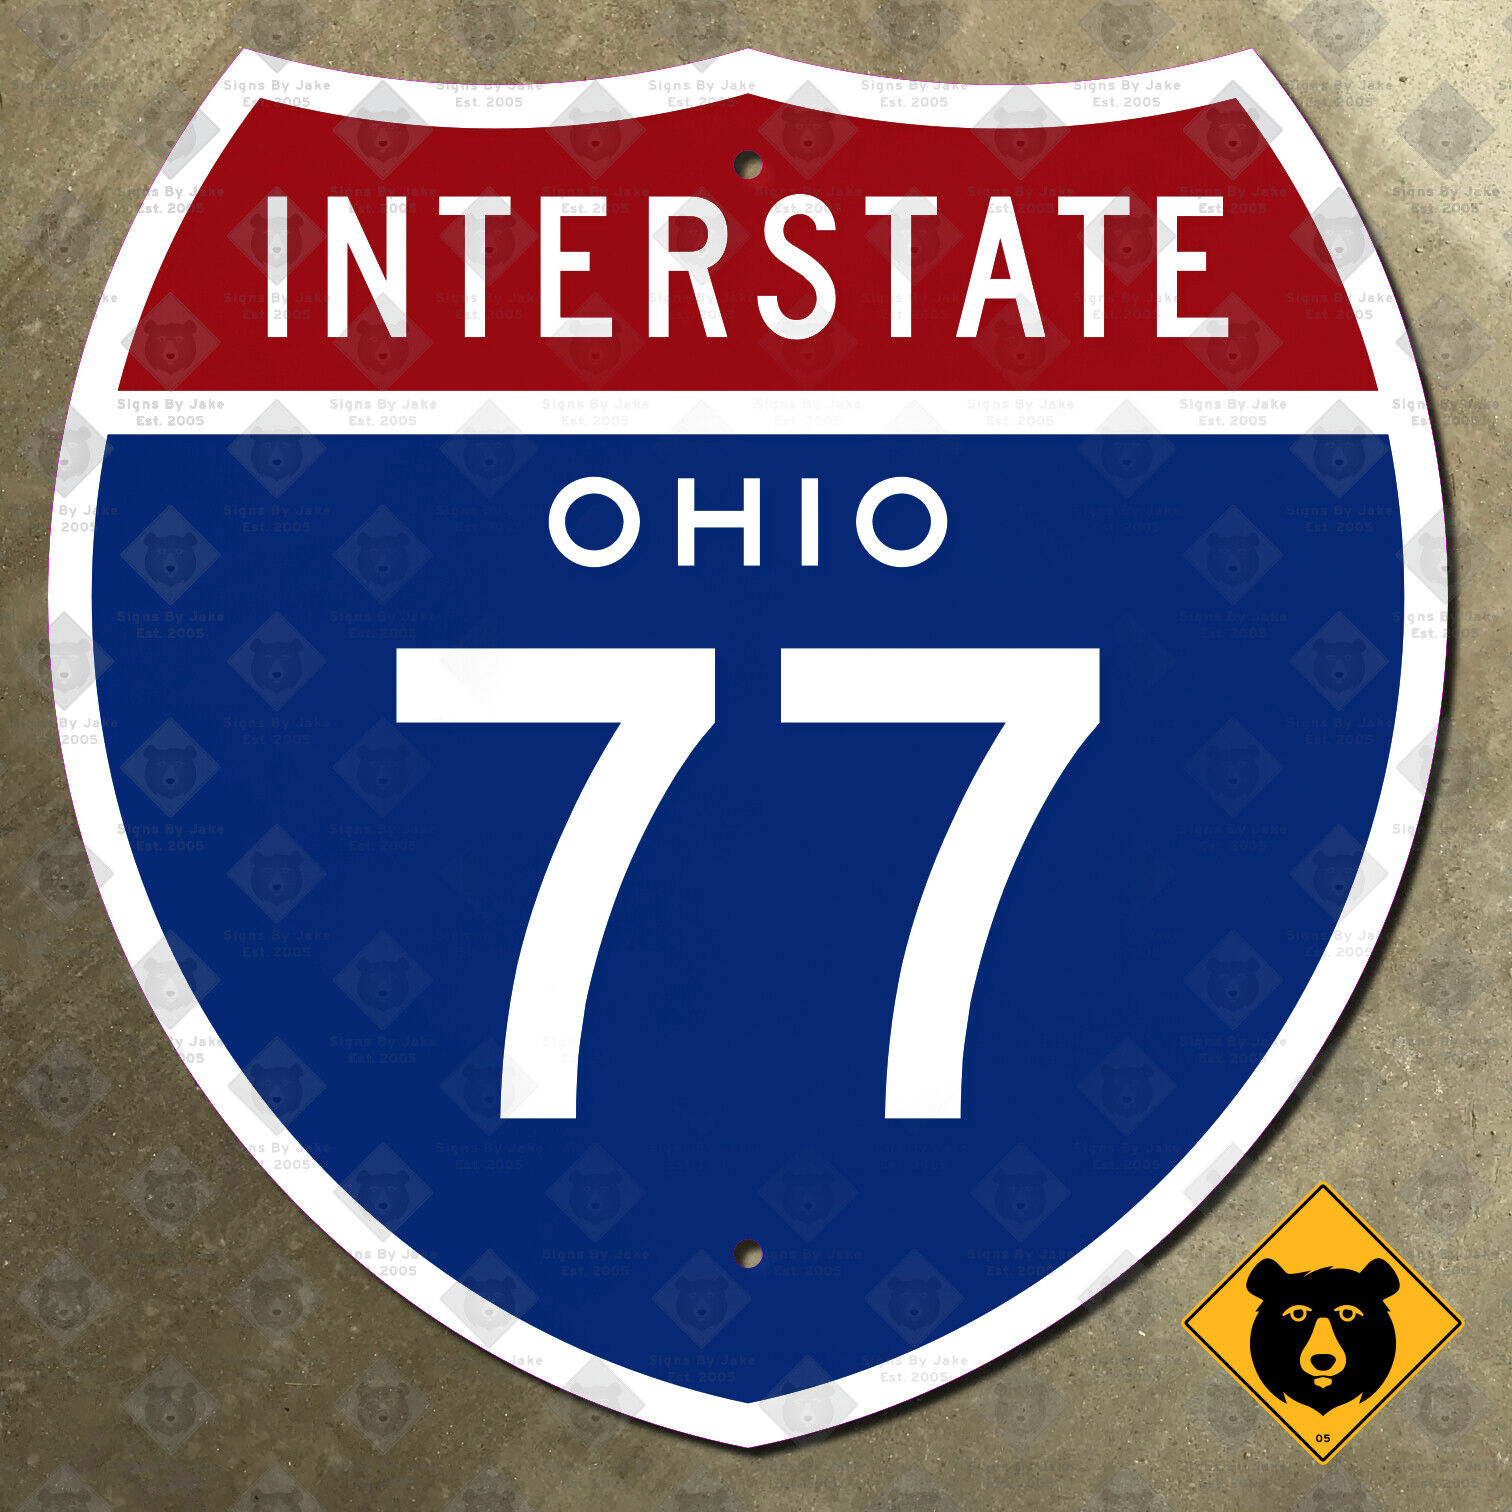 Ohio Interstate 77 highway route sign 1957 Cleveland Akron Canton 12x12